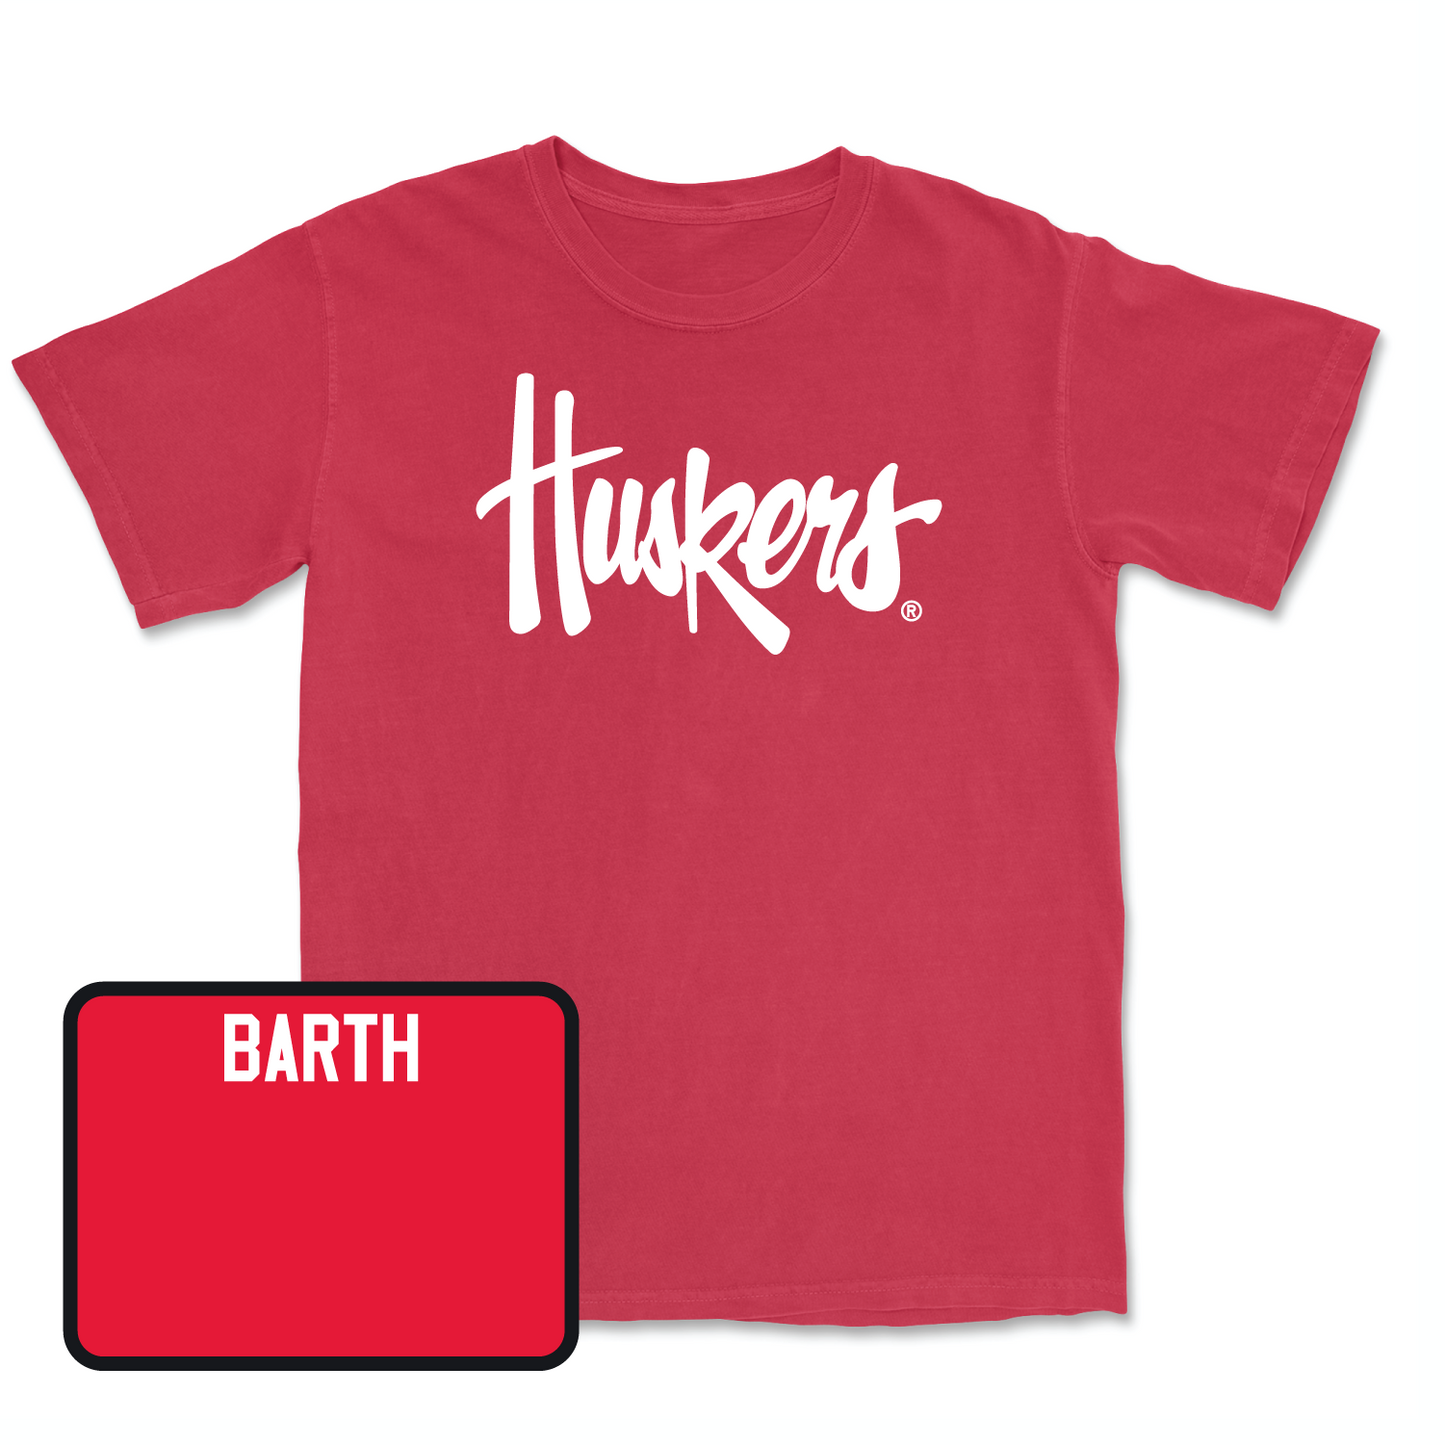 Red Women's Gymnastics Huskers Tee Small / Katelyn Barth